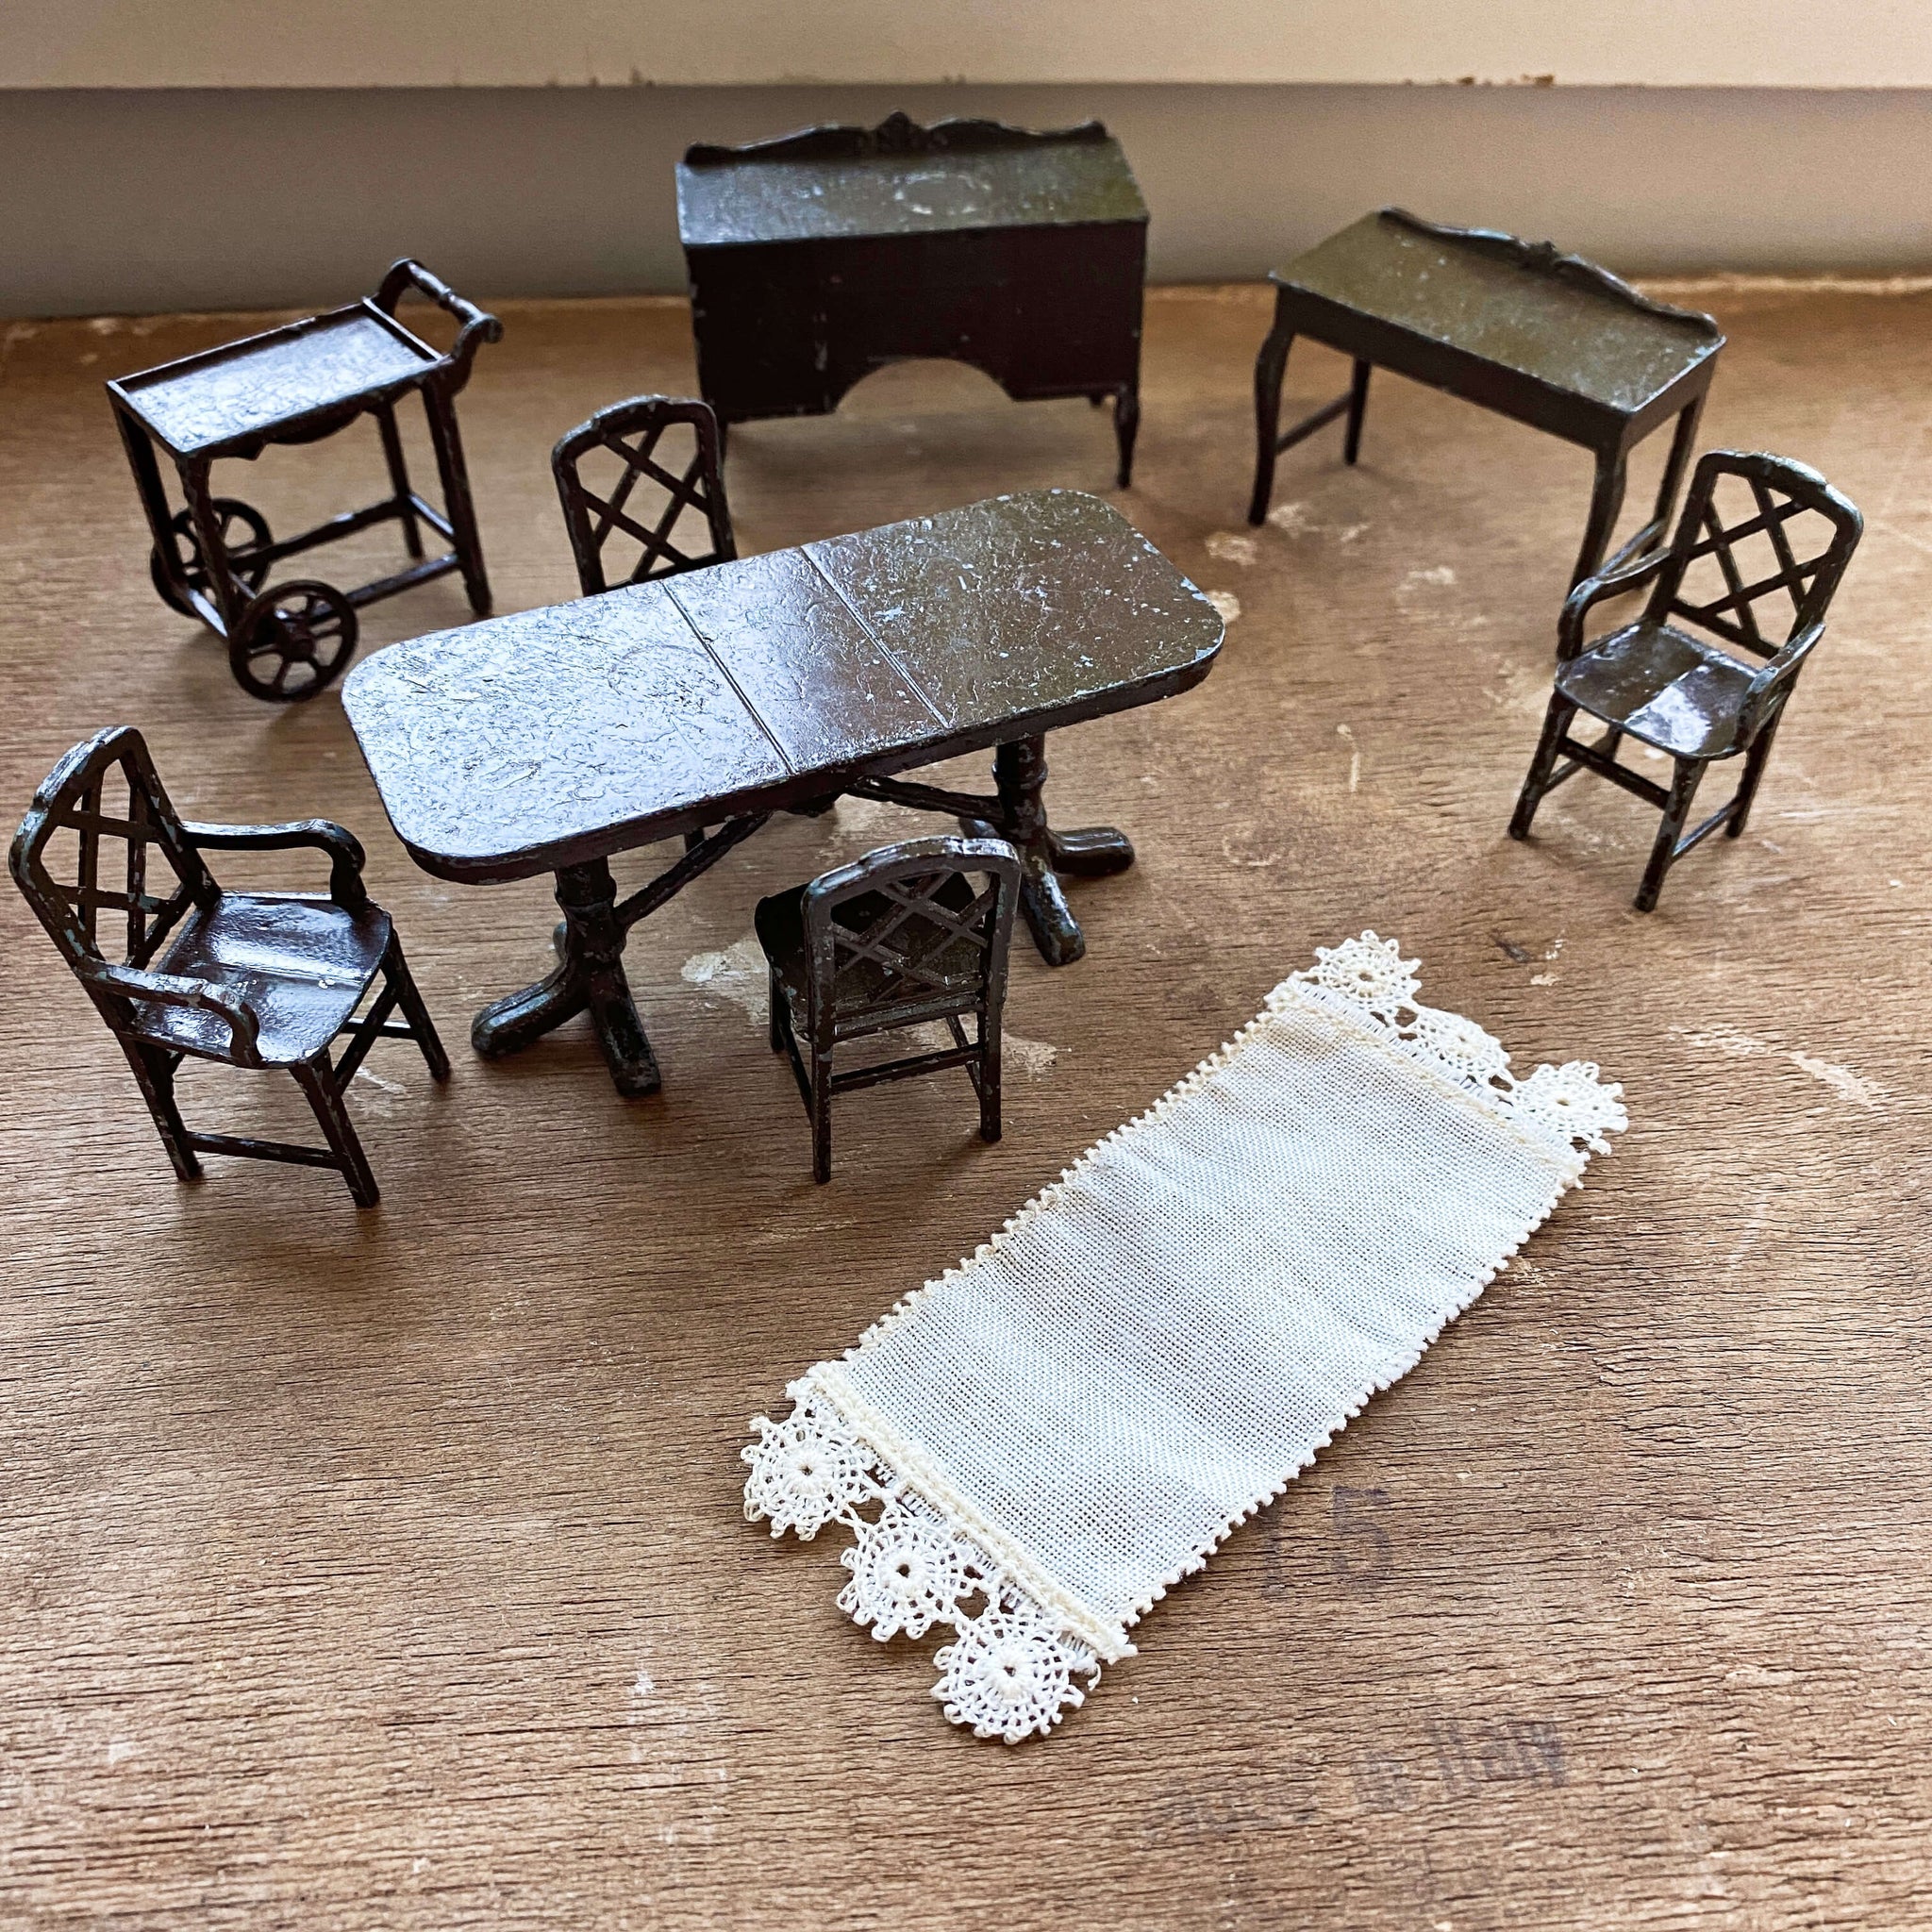 Vintage 1930s Tootsietoy Dining Room Furniture - 9 Pieces